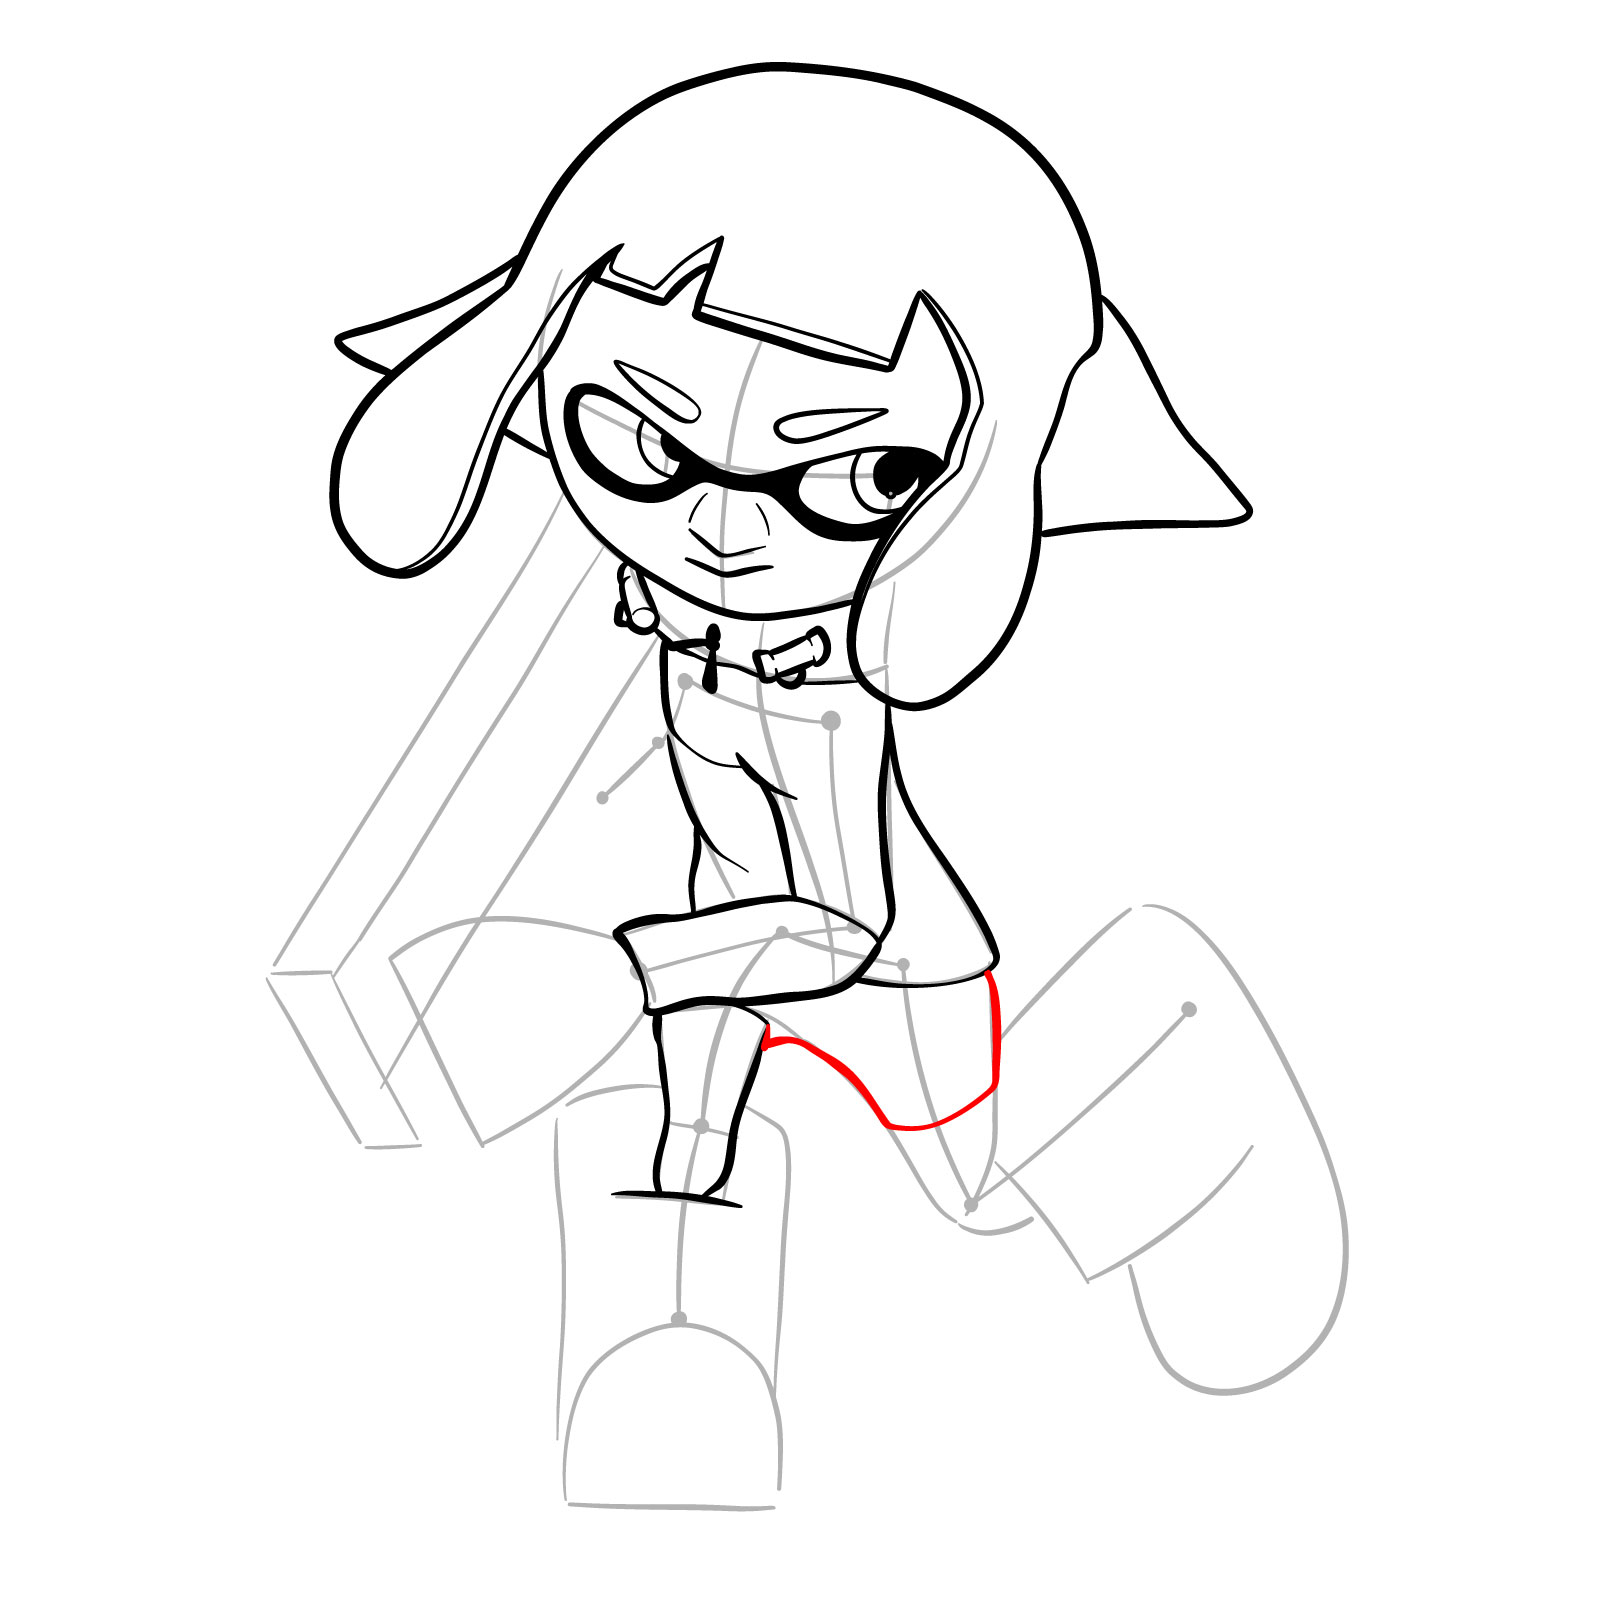 How to draw a Splatoon Agent 4 - step 17